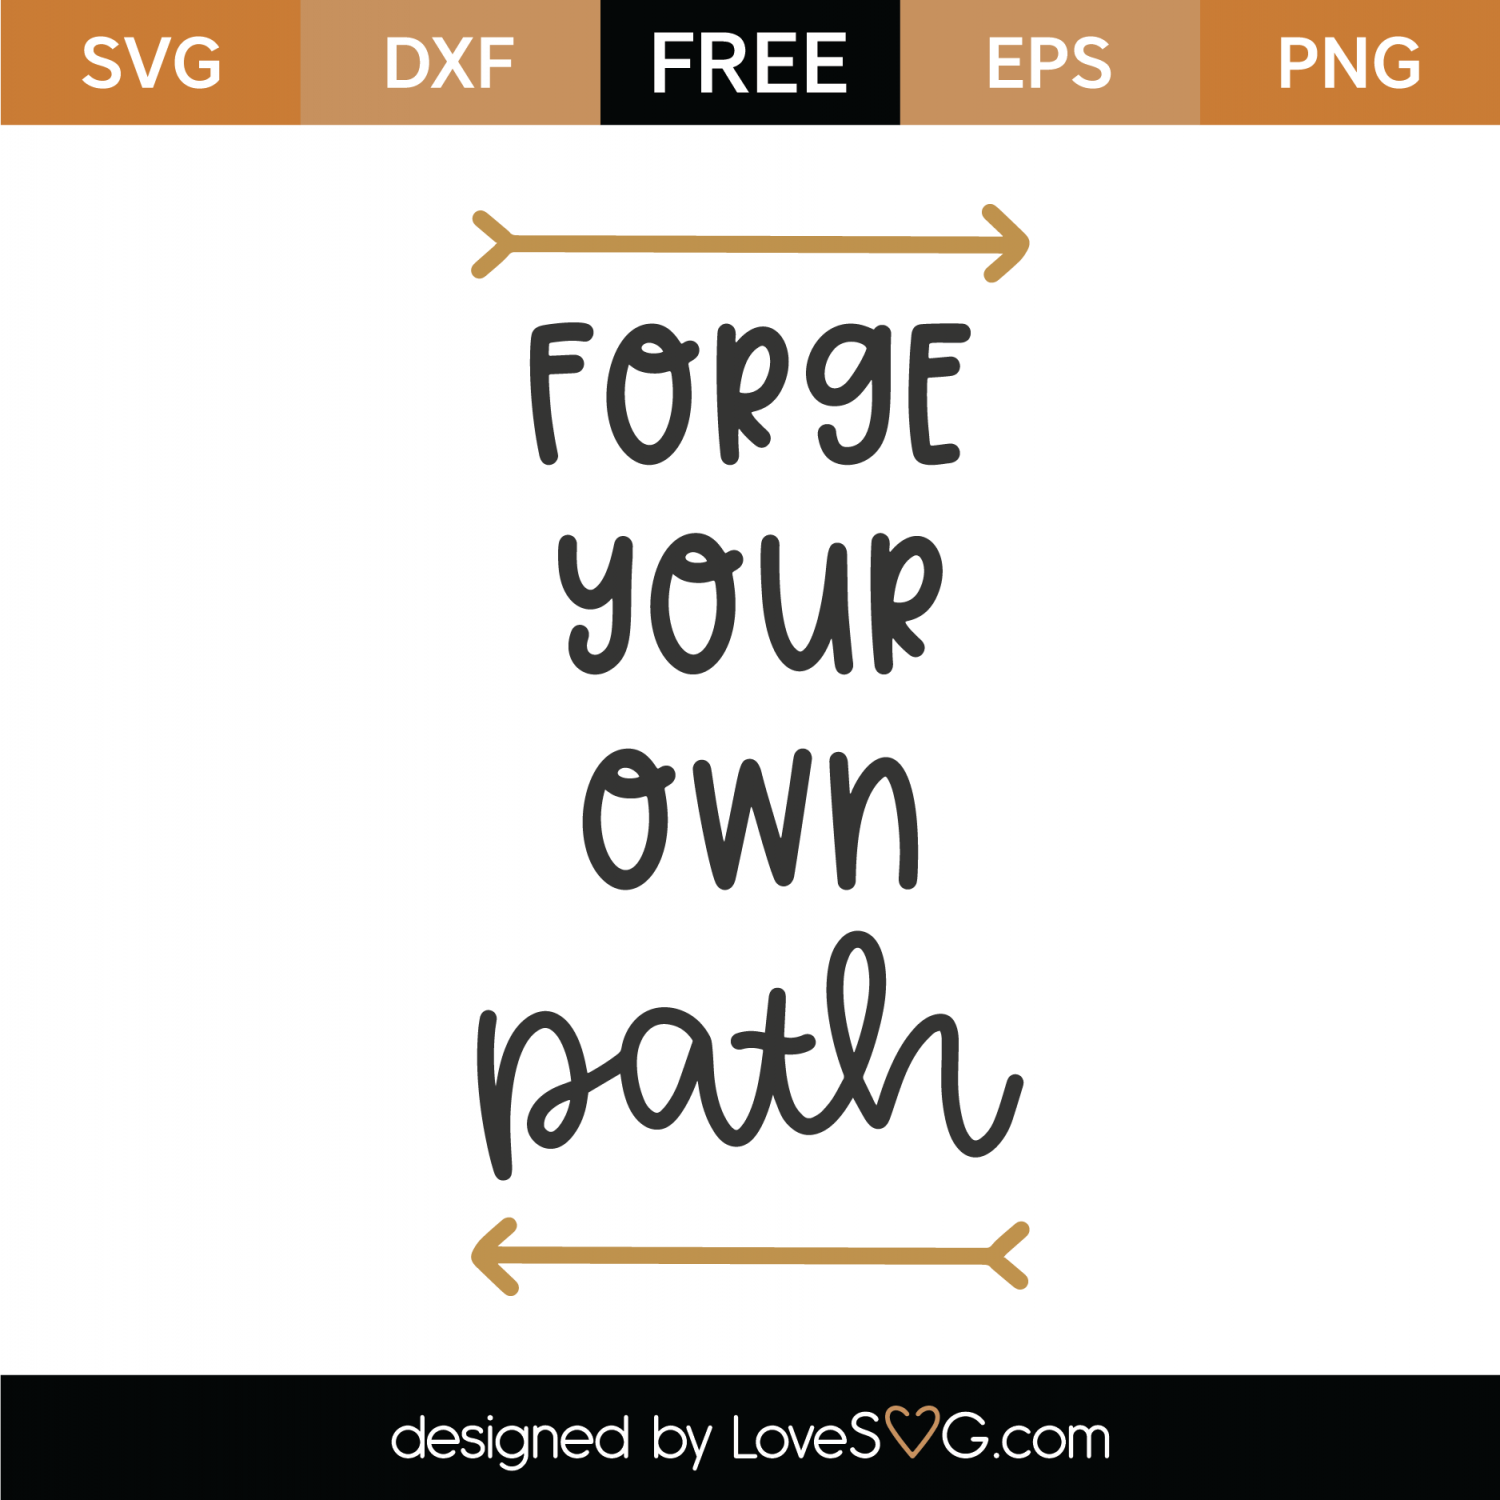 Download Free Forge Your Own Path SVG Cut File | Lovesvg.com